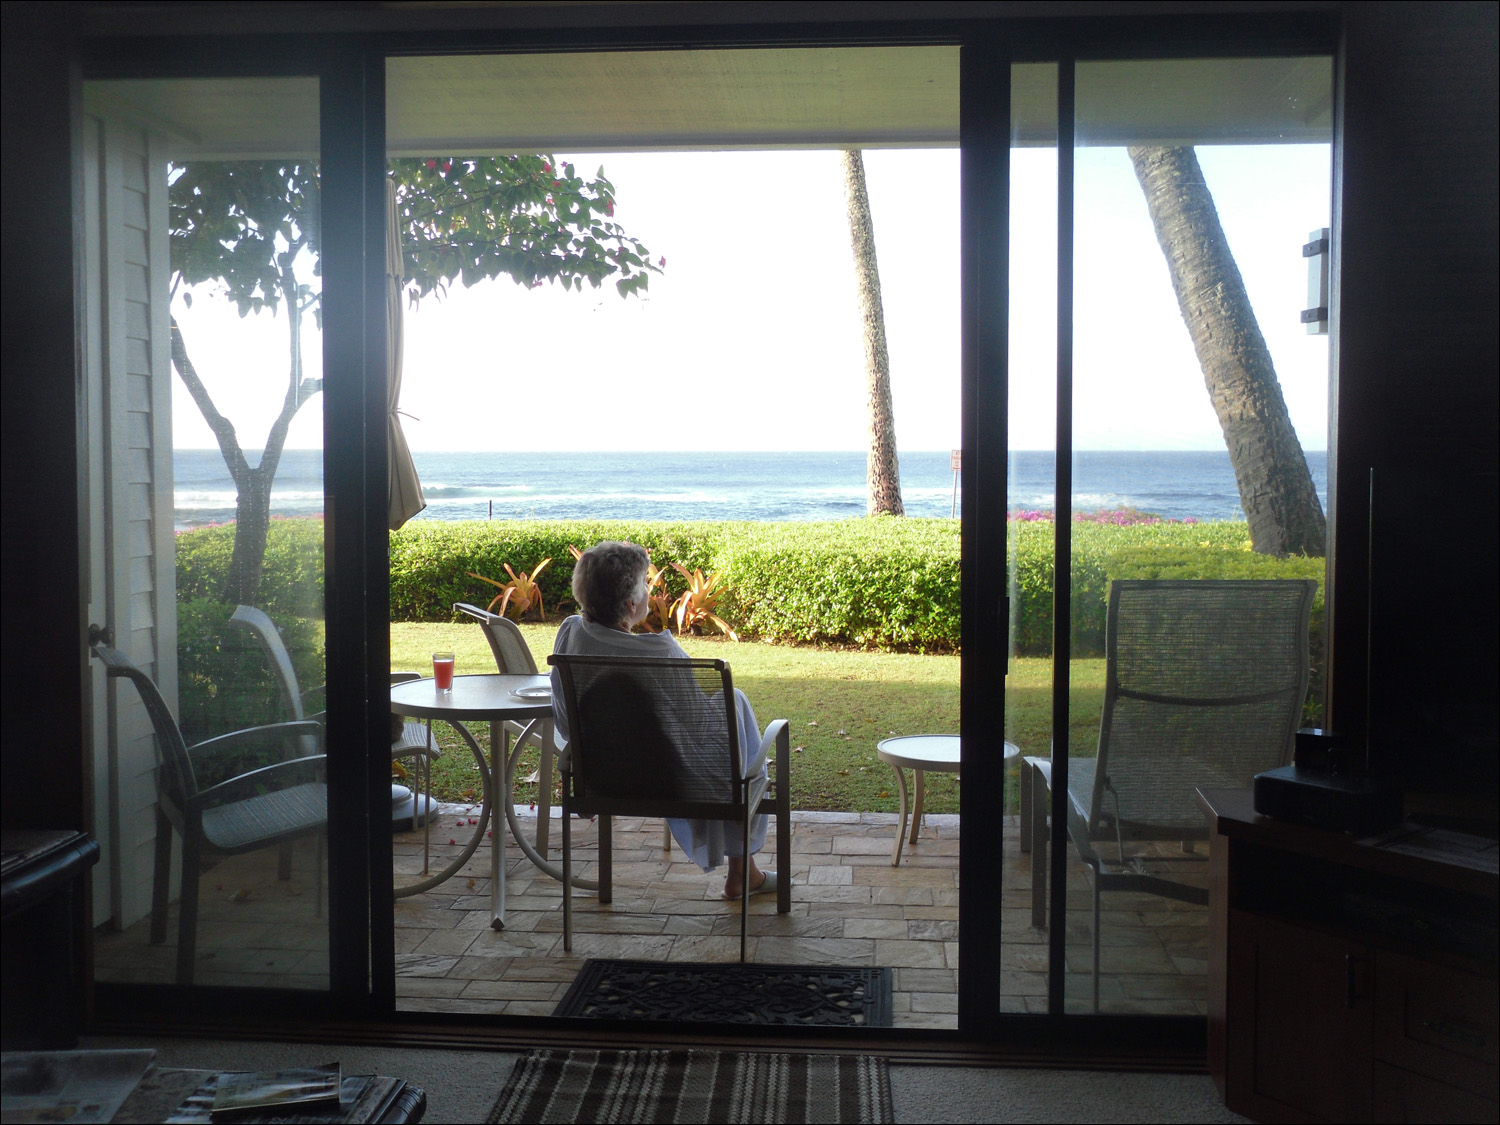 Morning whale watching from the lanai